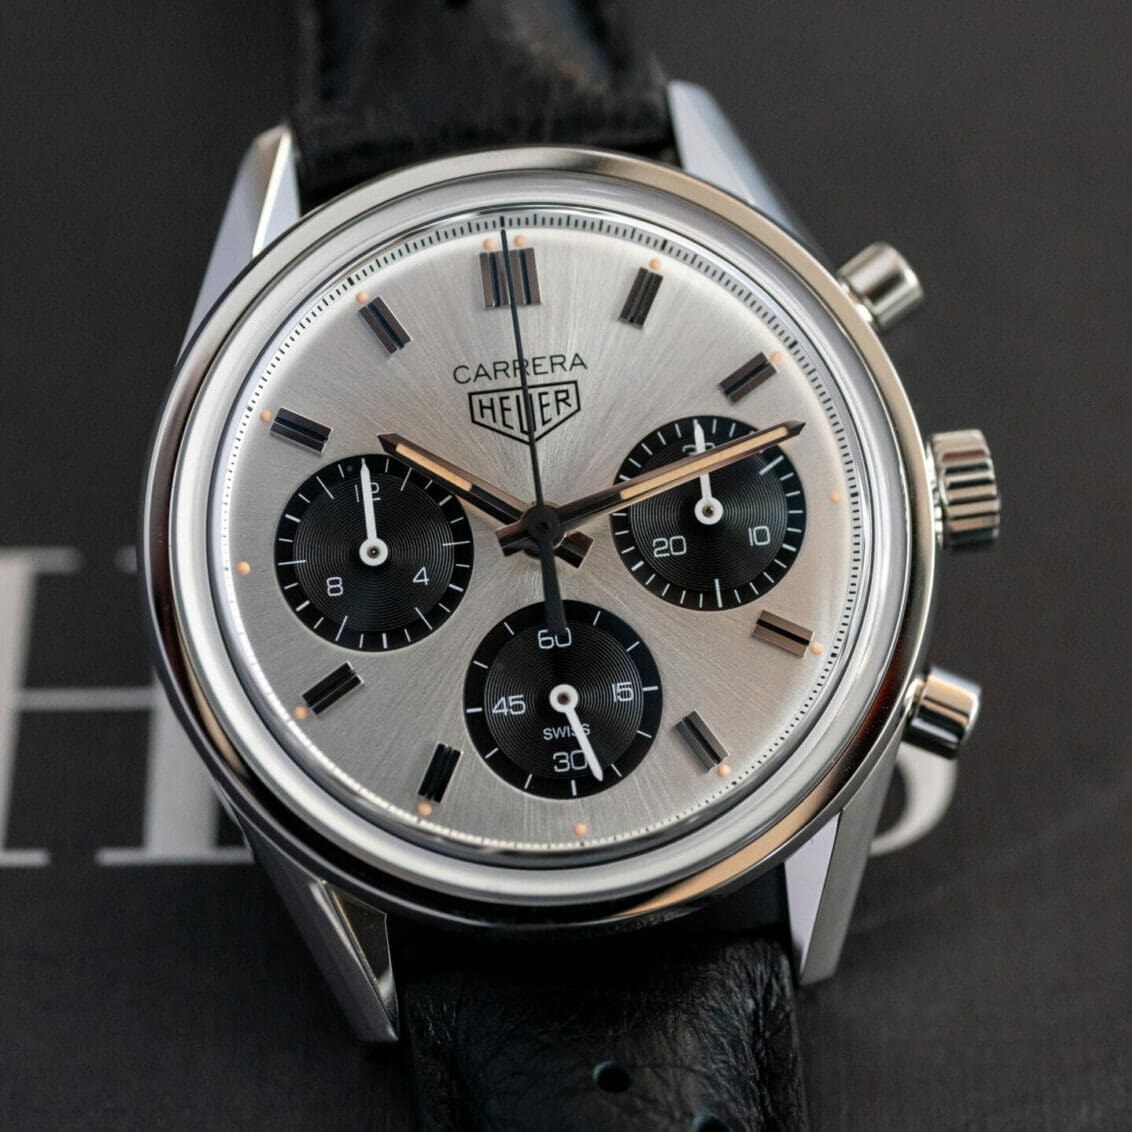 IN-DEPTH: The history of the TAG Heuer Carrera is inspired by a race with a serious body count